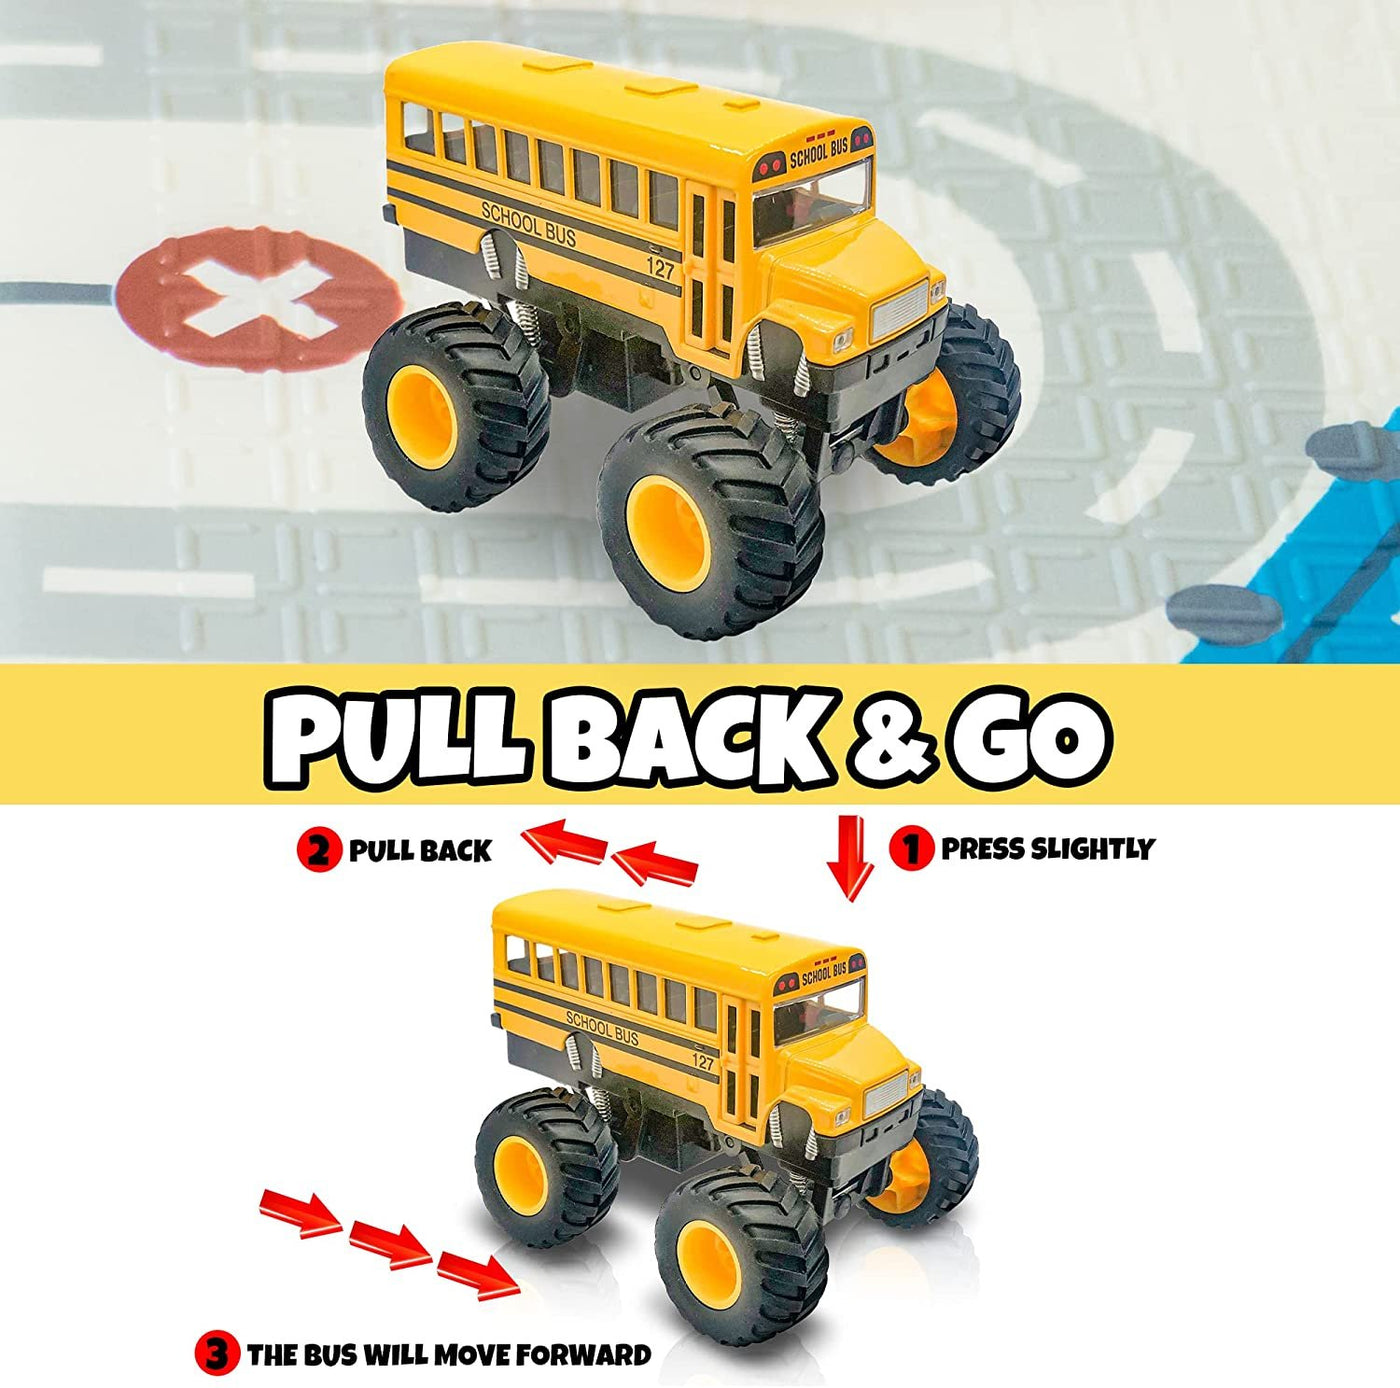 5" Monster School Bus, Super Monster Bus with Pullback Mechanism, Diecast Monster Truck Bus for Kids, Big Wheels Monster Truck Toys, Play Vehicle Gifts for Boys